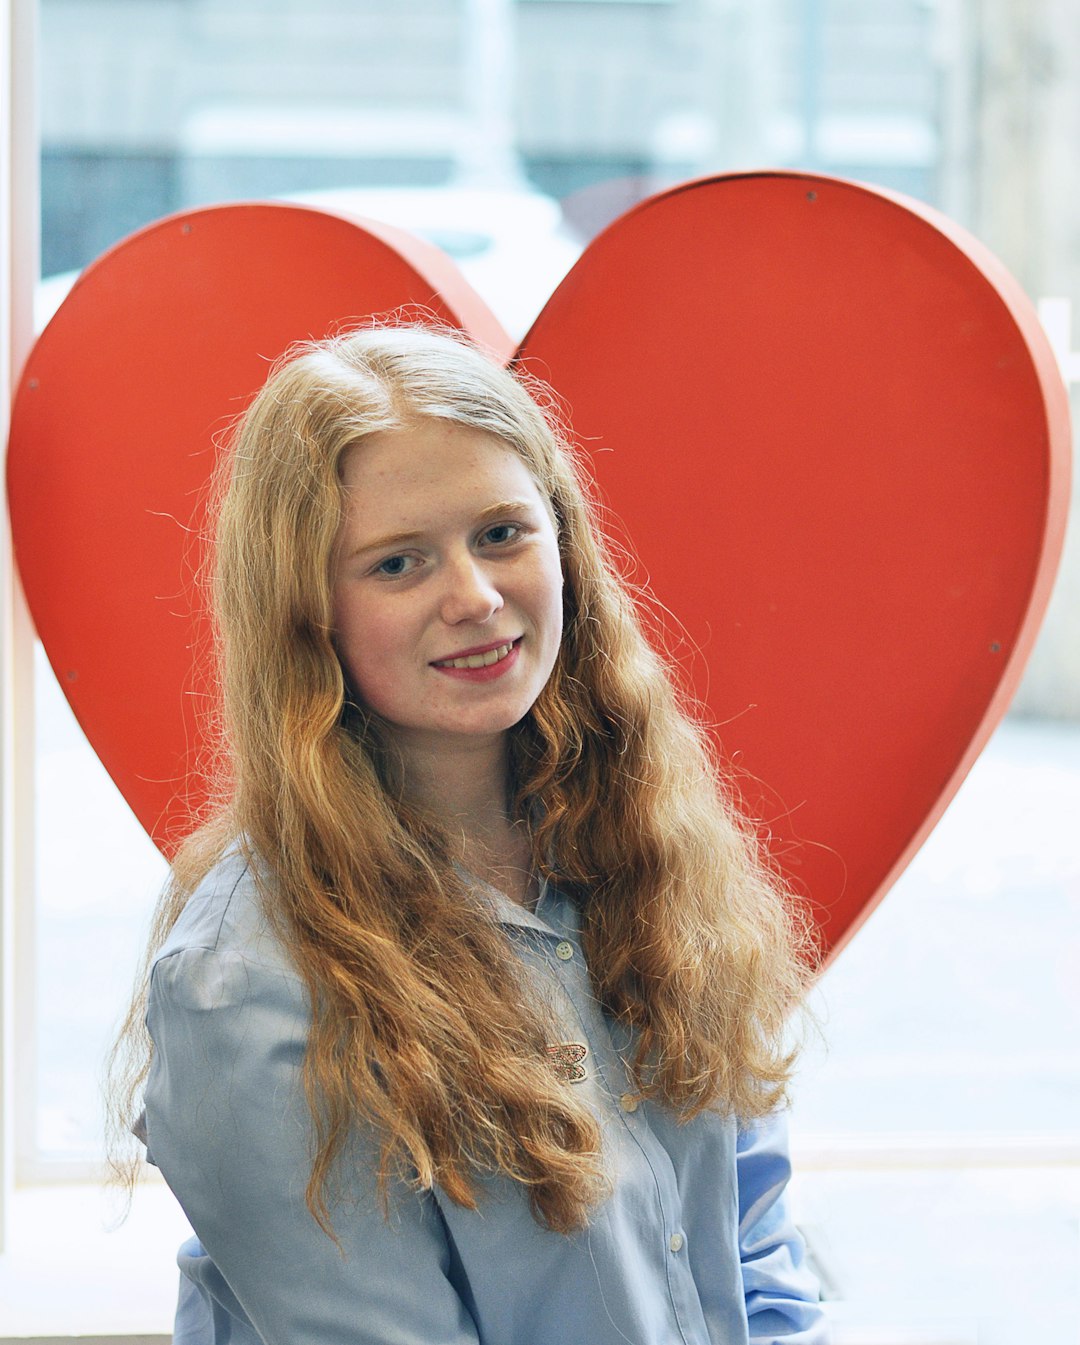 A blonde woman standing in front of a large red heart.